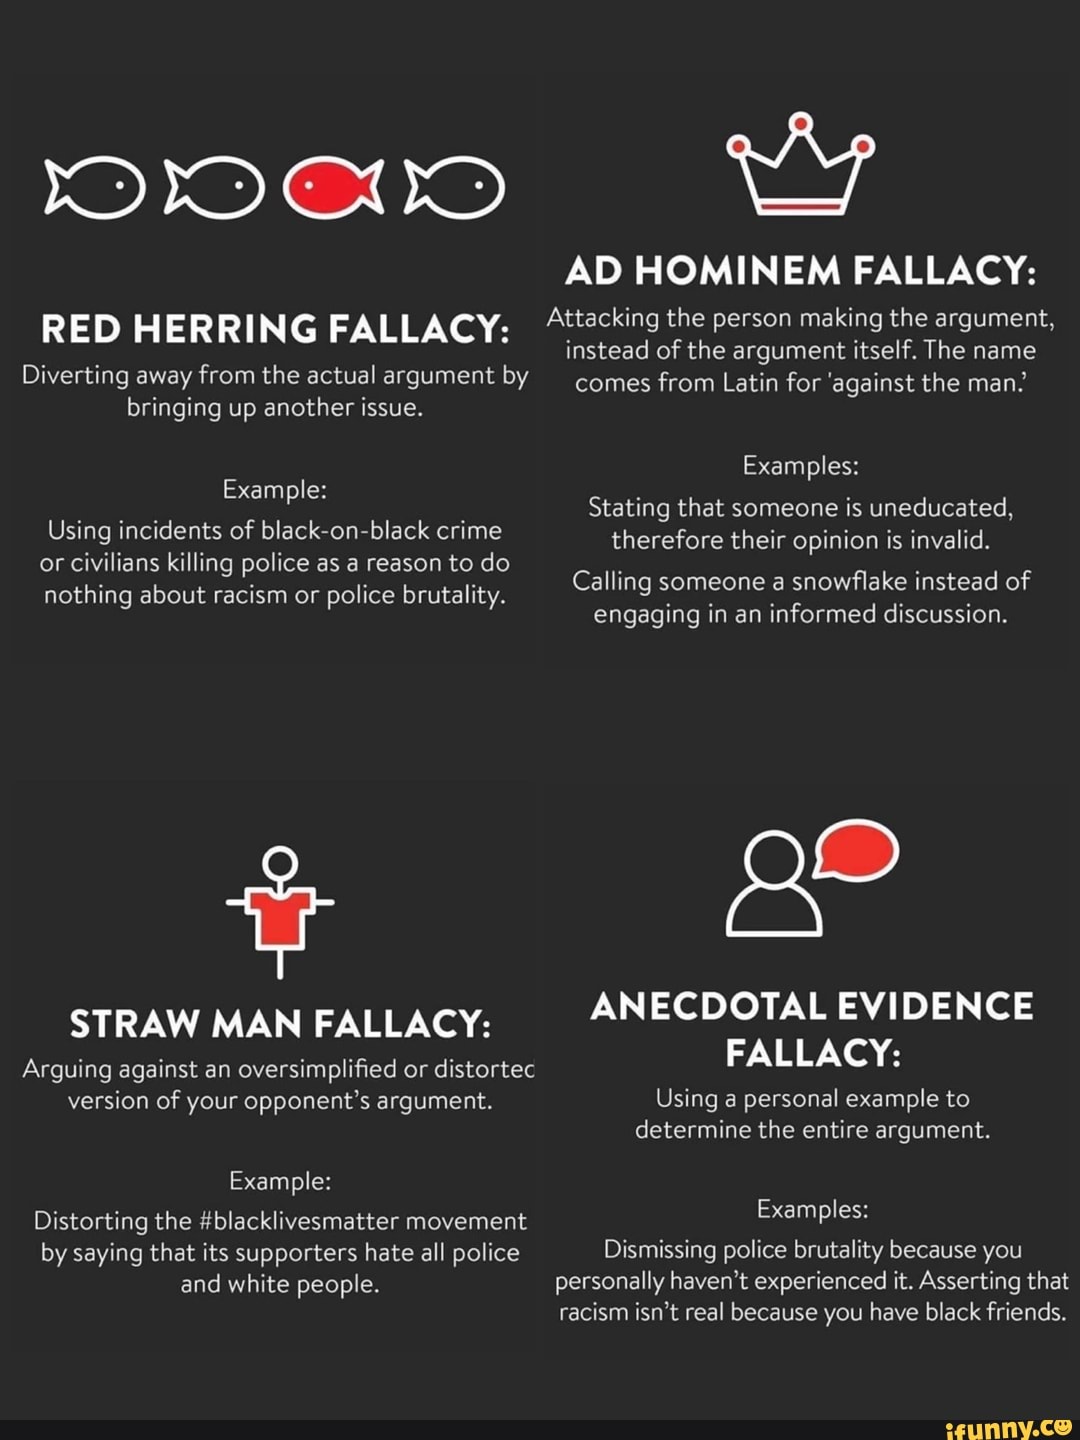 red herring fallacy examples in politics